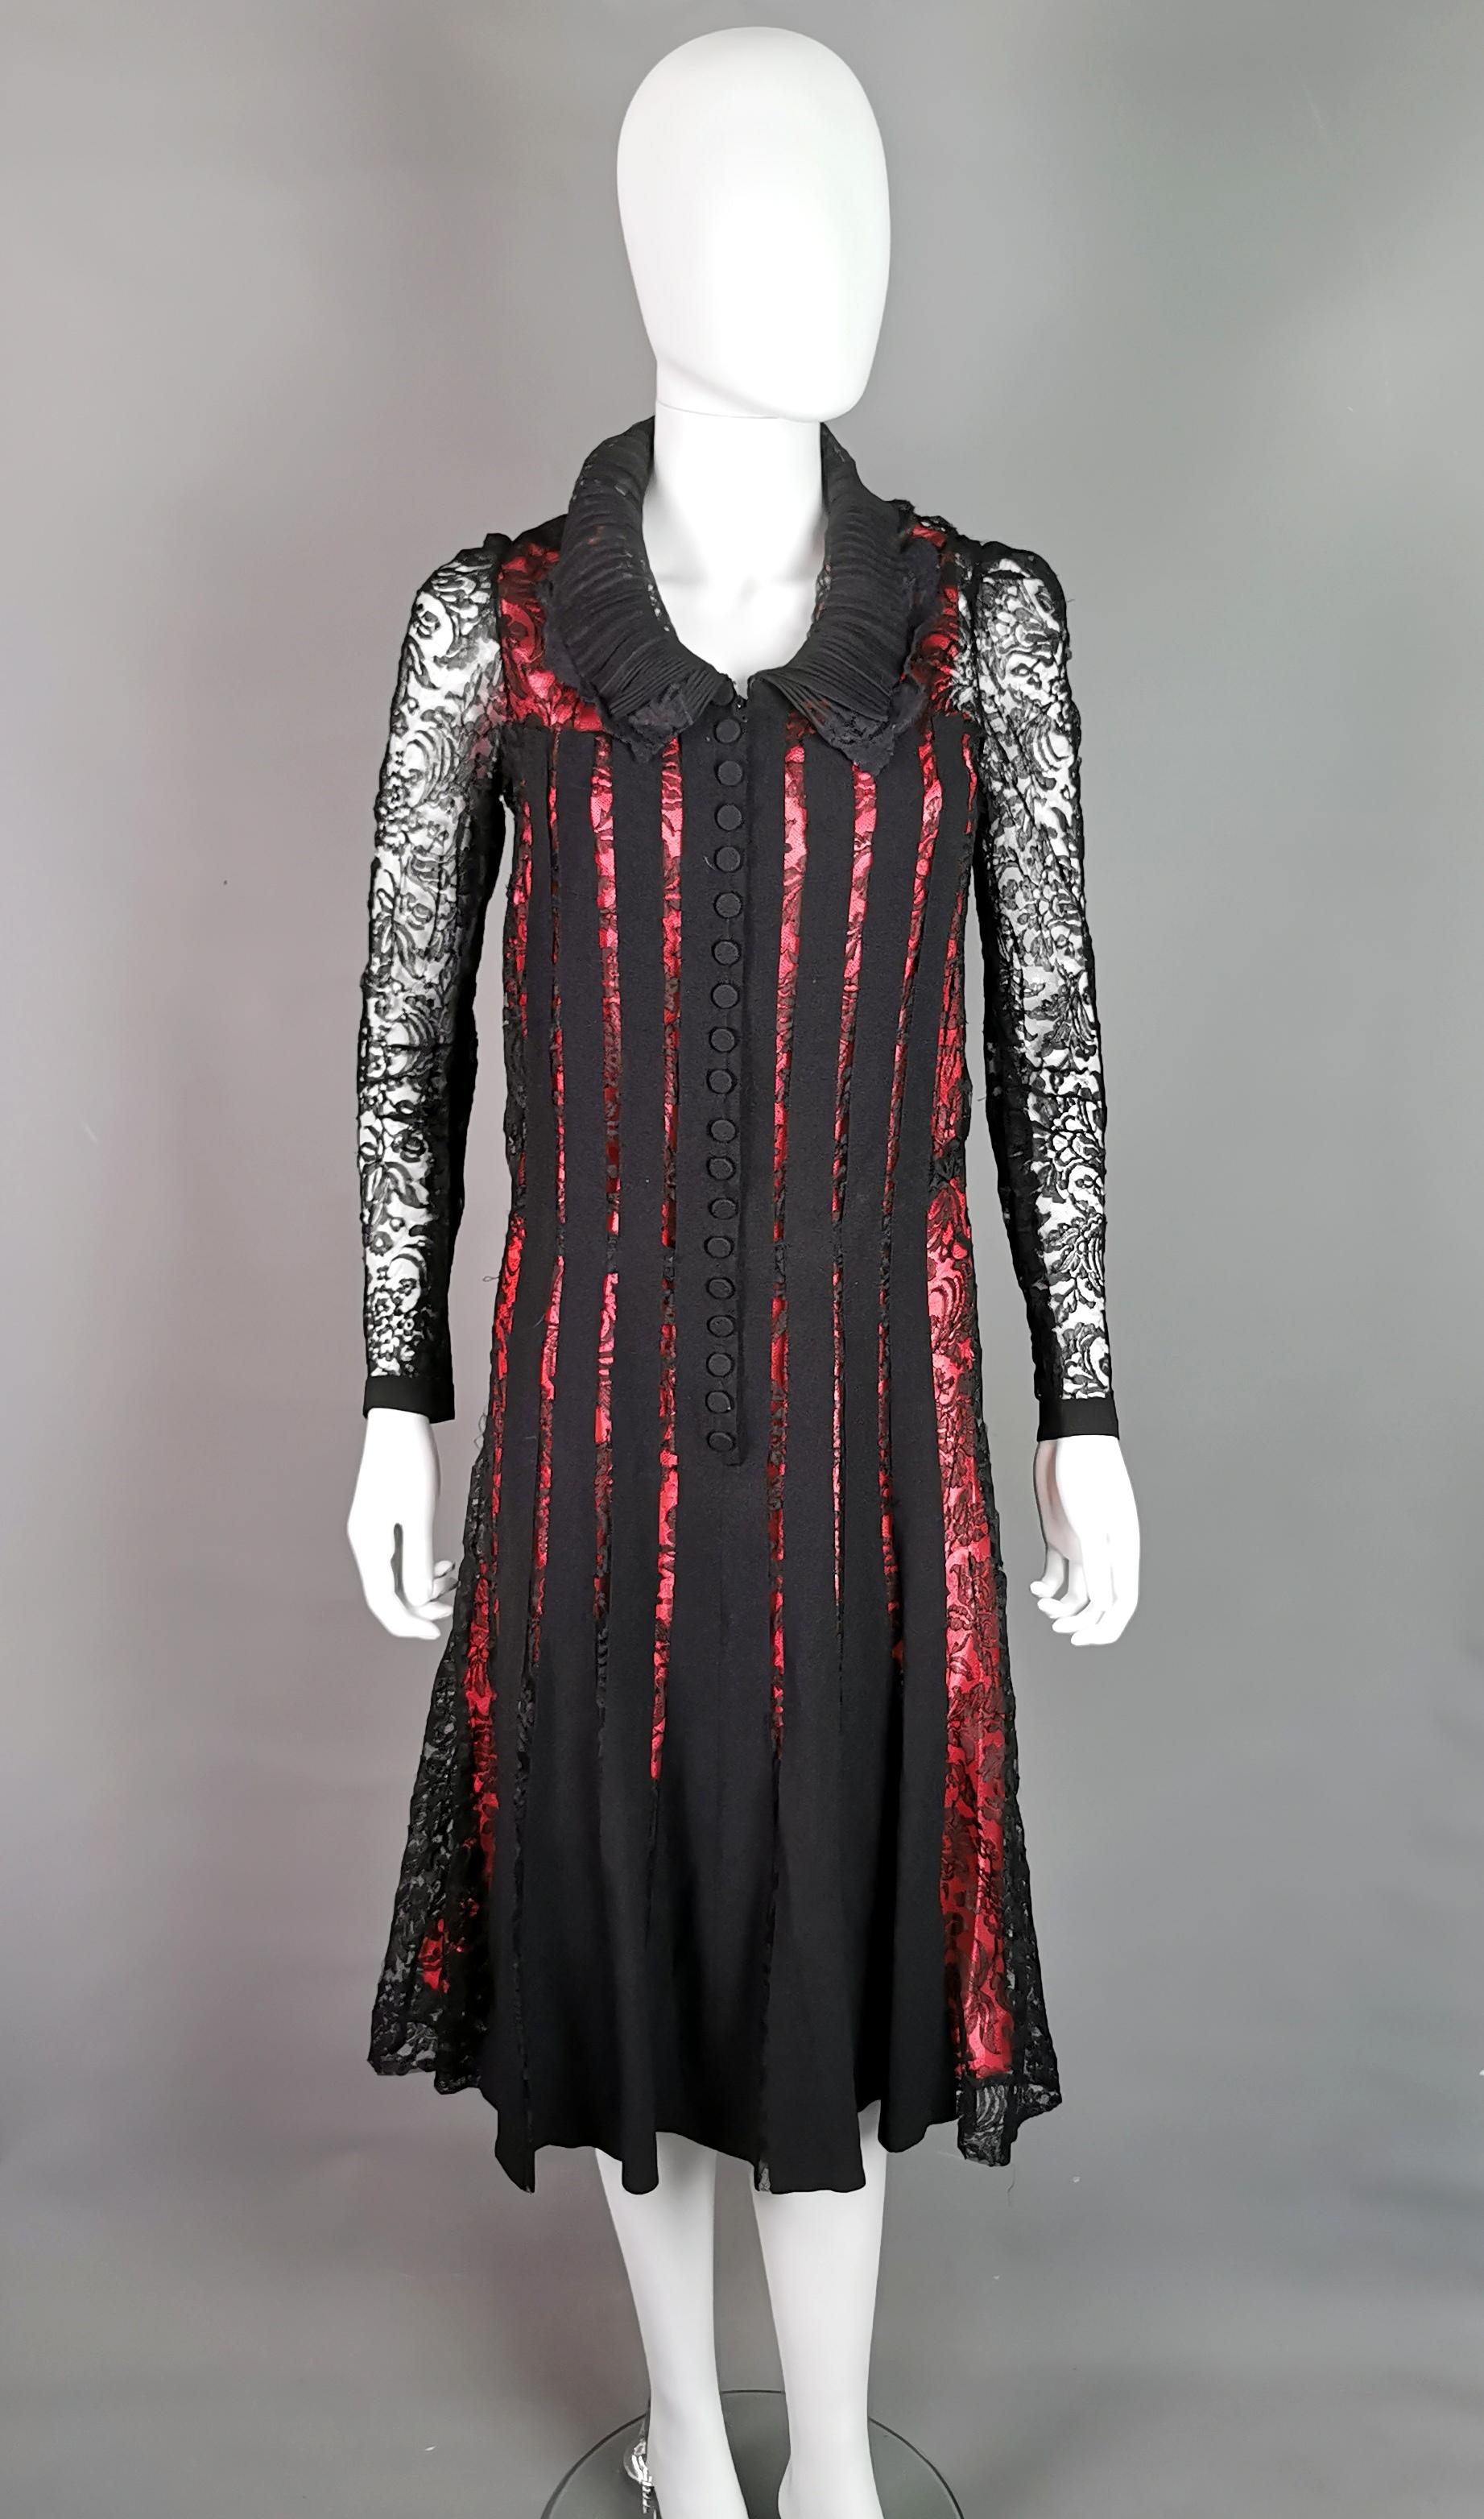 A rare vintage c1930s evening dress.

A black lace overdress with a metal zipper up the front and black taping to the front and back.

The dress has long sleeves which taper down and buttons at the cuffs, slightly nipped in at the waist with an a